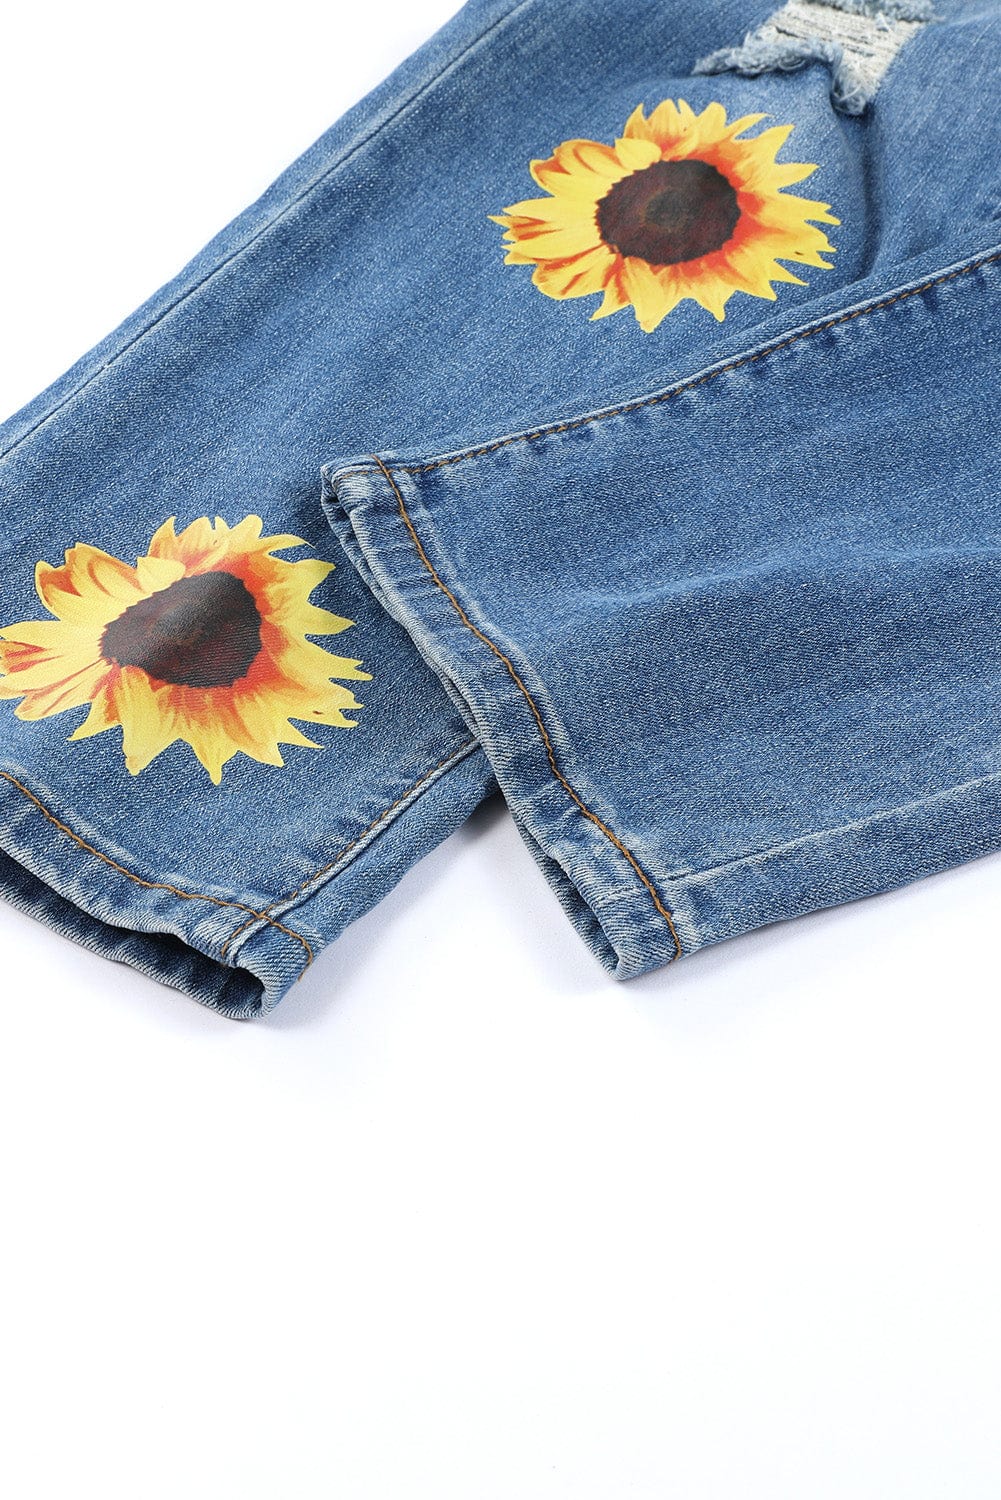 - Sunflower Ripped Mid Rise Jeans by TFC&H Co. - womens Jeans at TFC&H Co.